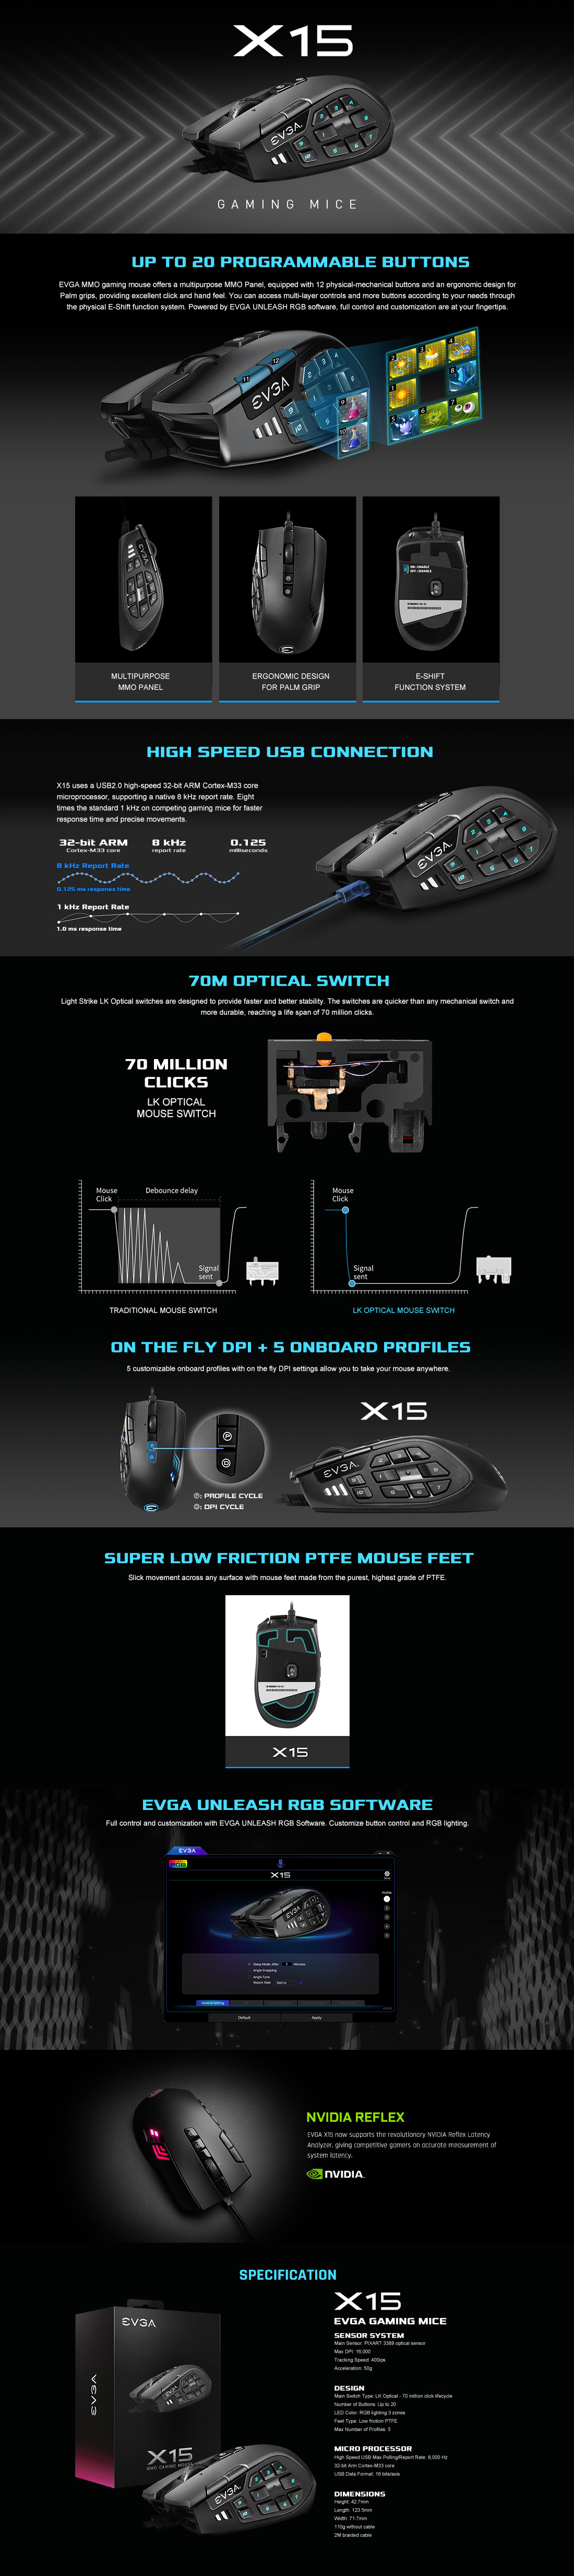 EVGA X15 MMO gaming mouse specs